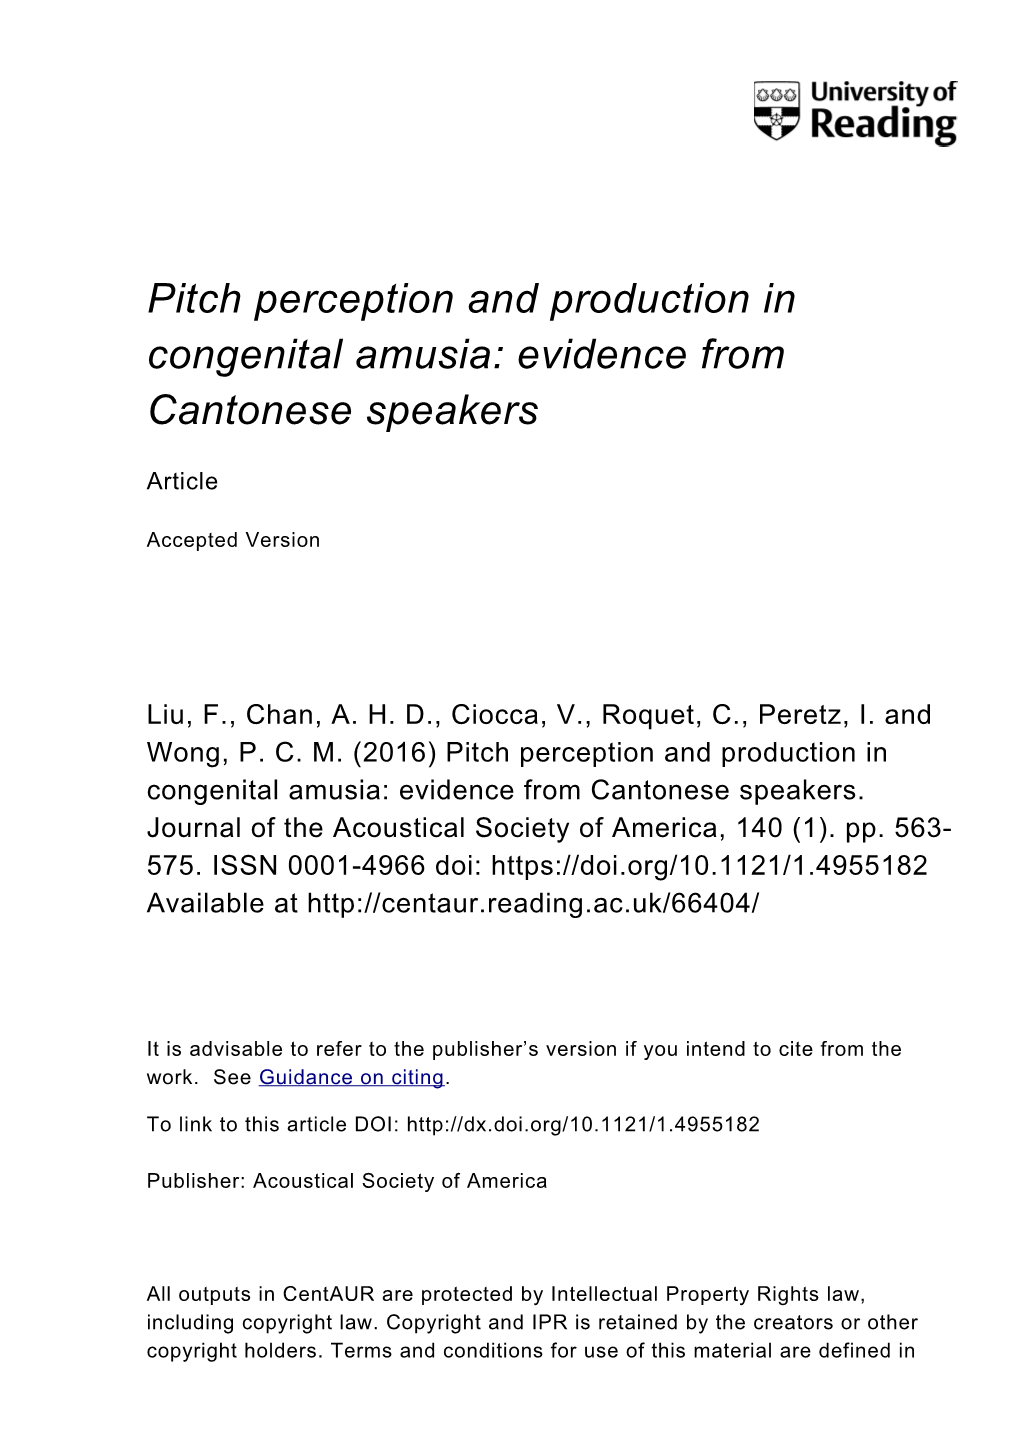 Pitch Perception and Production in Congenital Amusia: Evidence from Cantonese Speakers